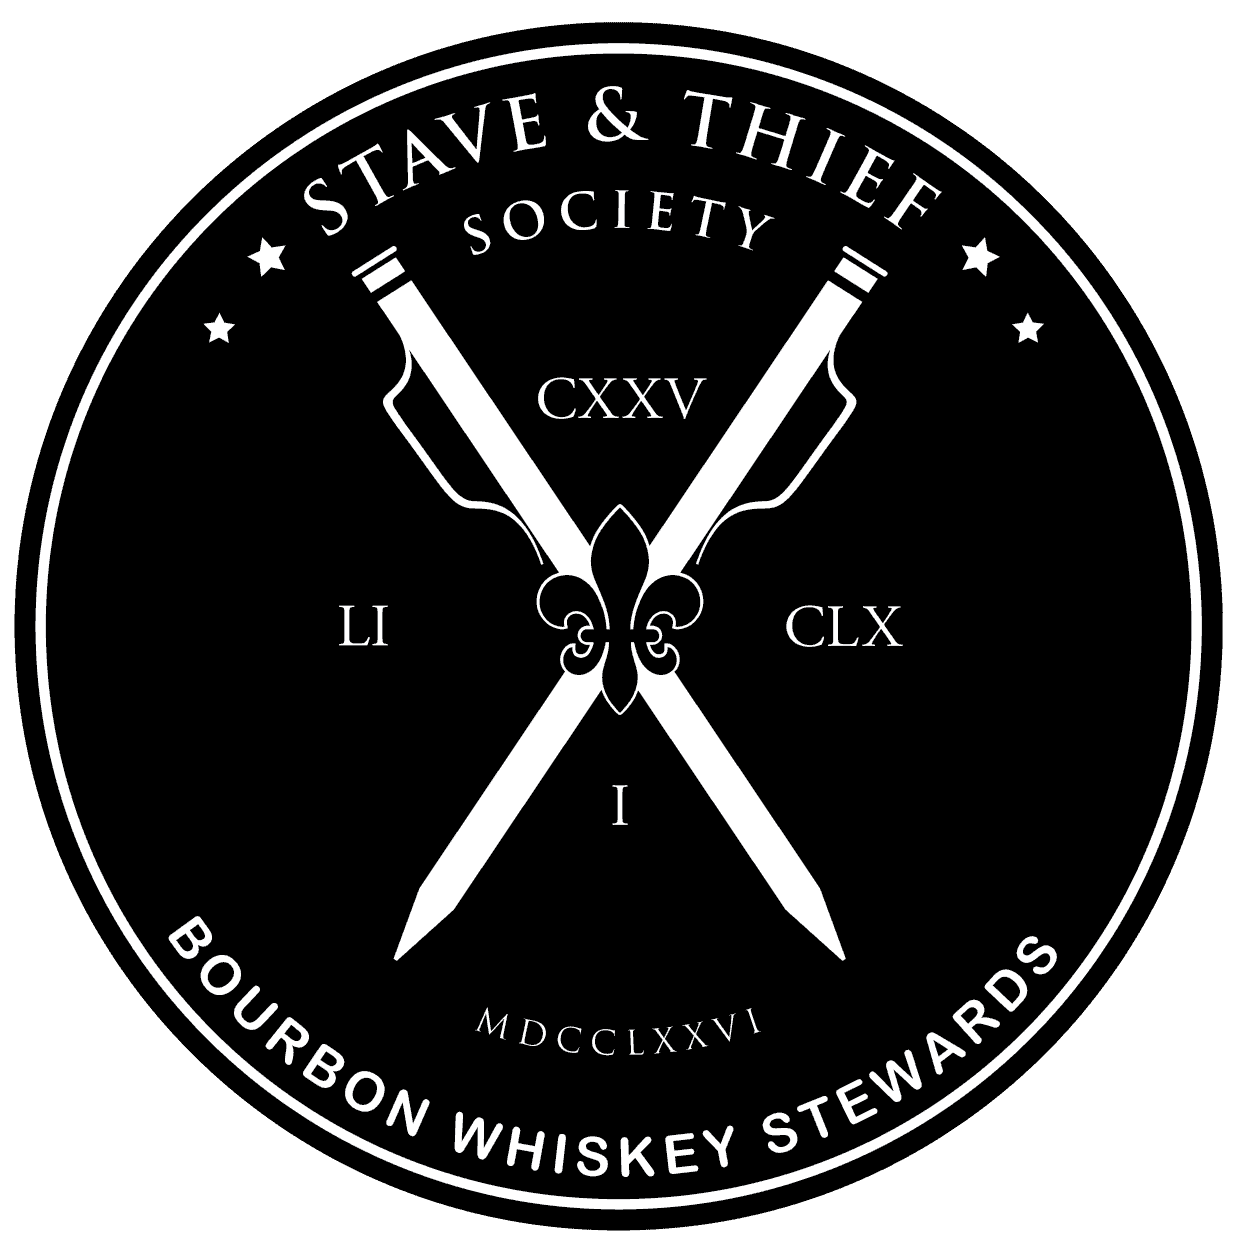 Stave and Thief Logo